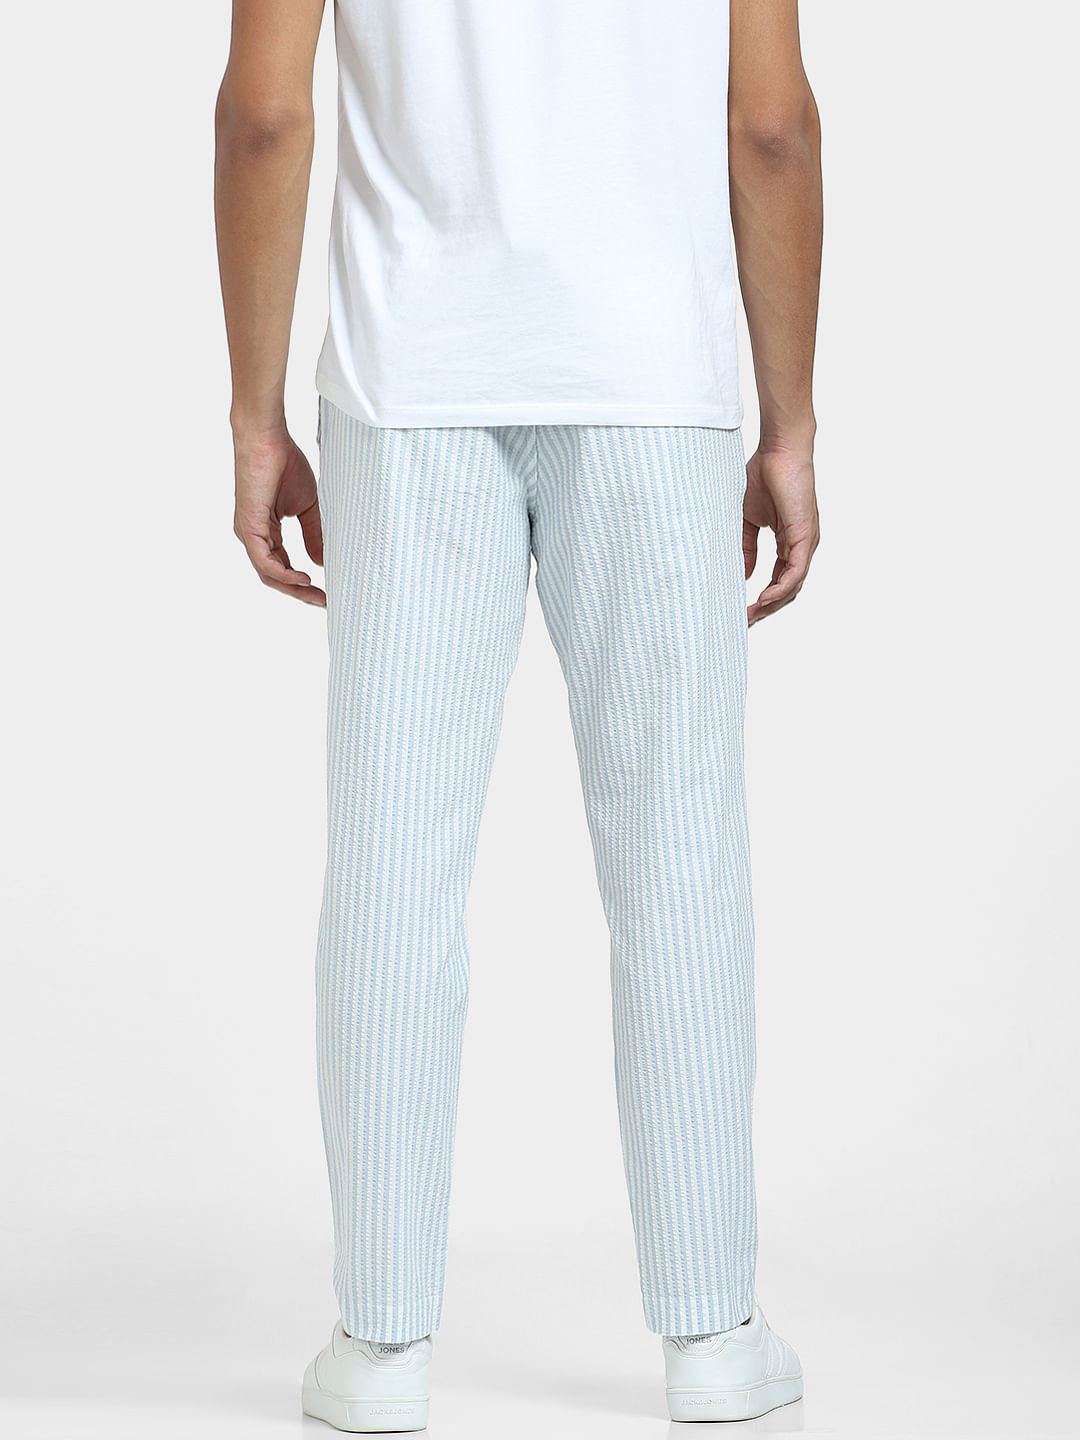 Buy HANCOCK Blue Mens Slim Fit Striped Trousers  Shoppers Stop